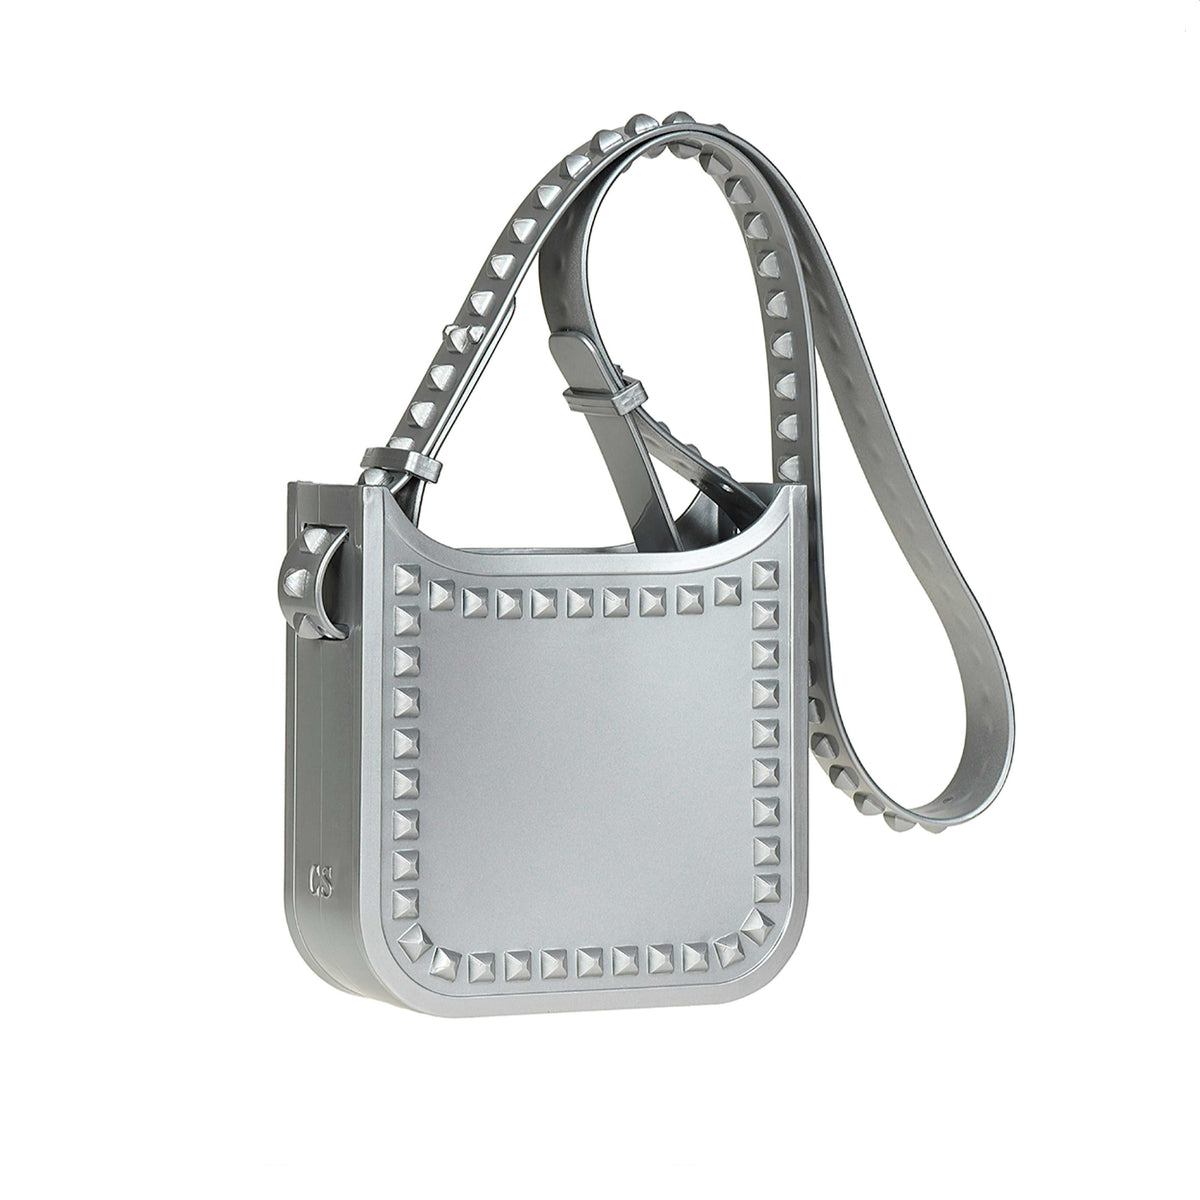 Silver Lisa small jelly crossbody bag with adjustable straps on sale